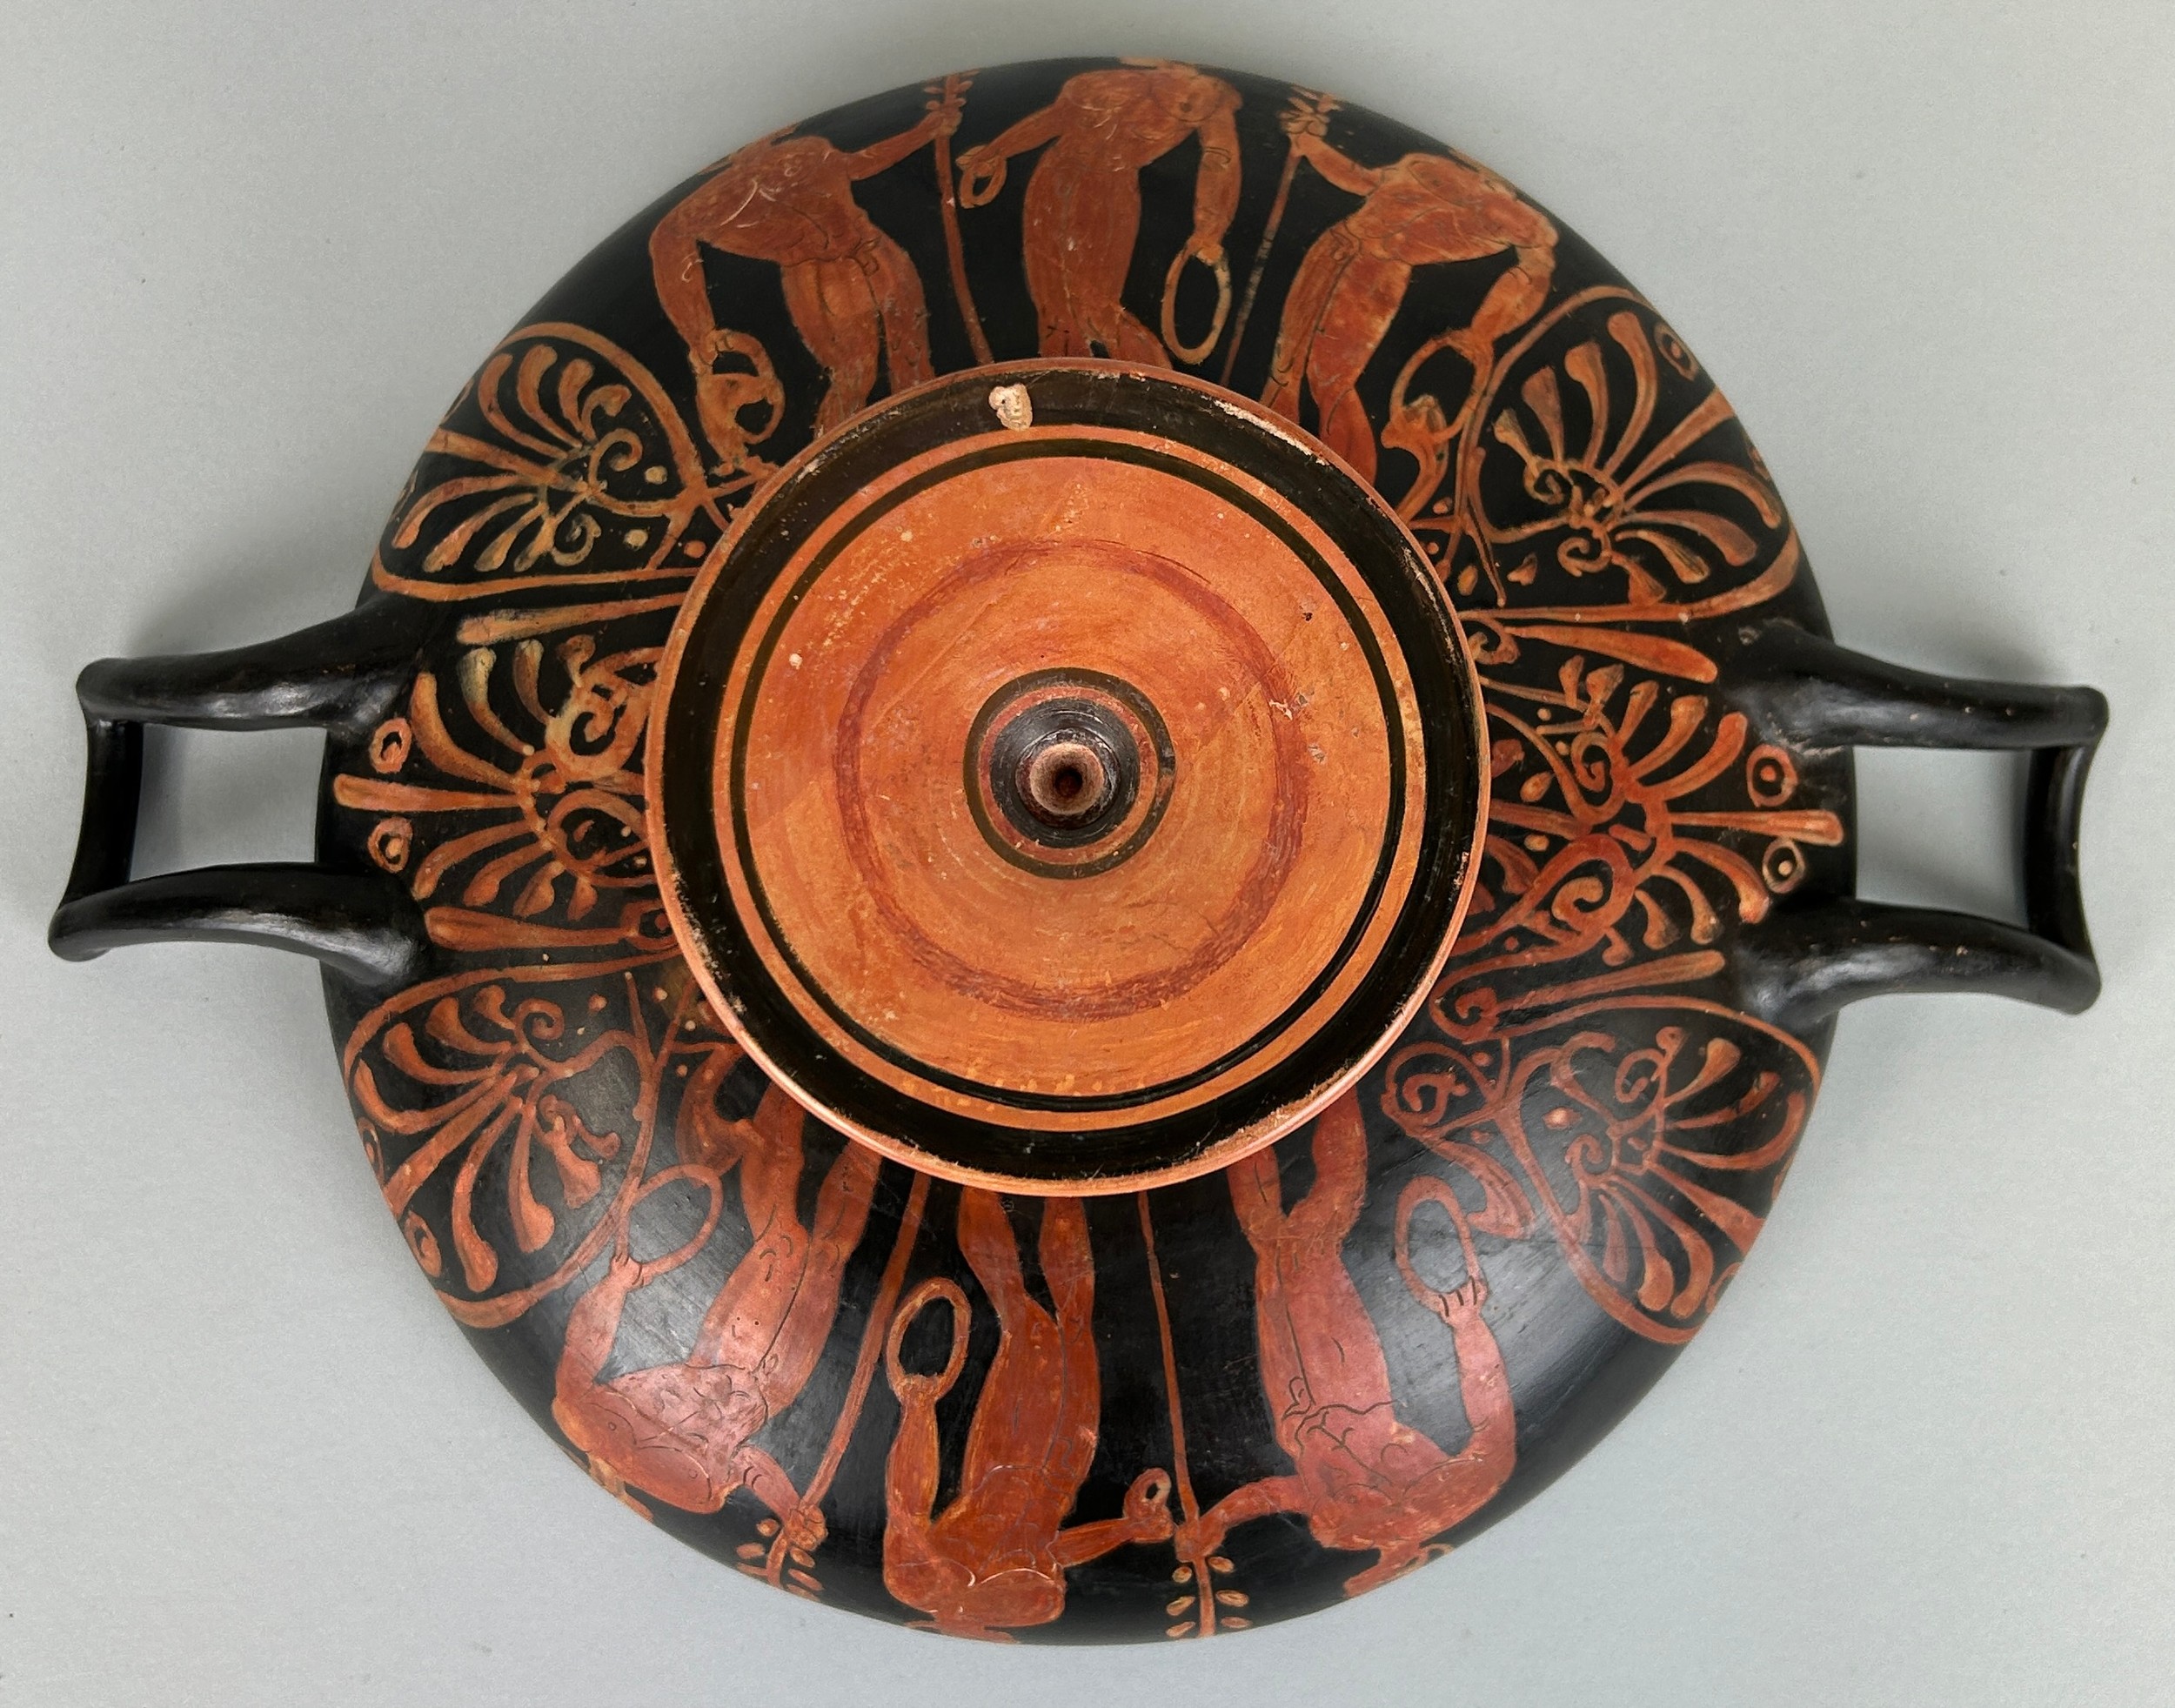 AN APULIAN POTTERY KYLIX DECORATED WITH A HORSE AND RIDER CIRCA 5TH CENTURY B.C. - Image 3 of 10